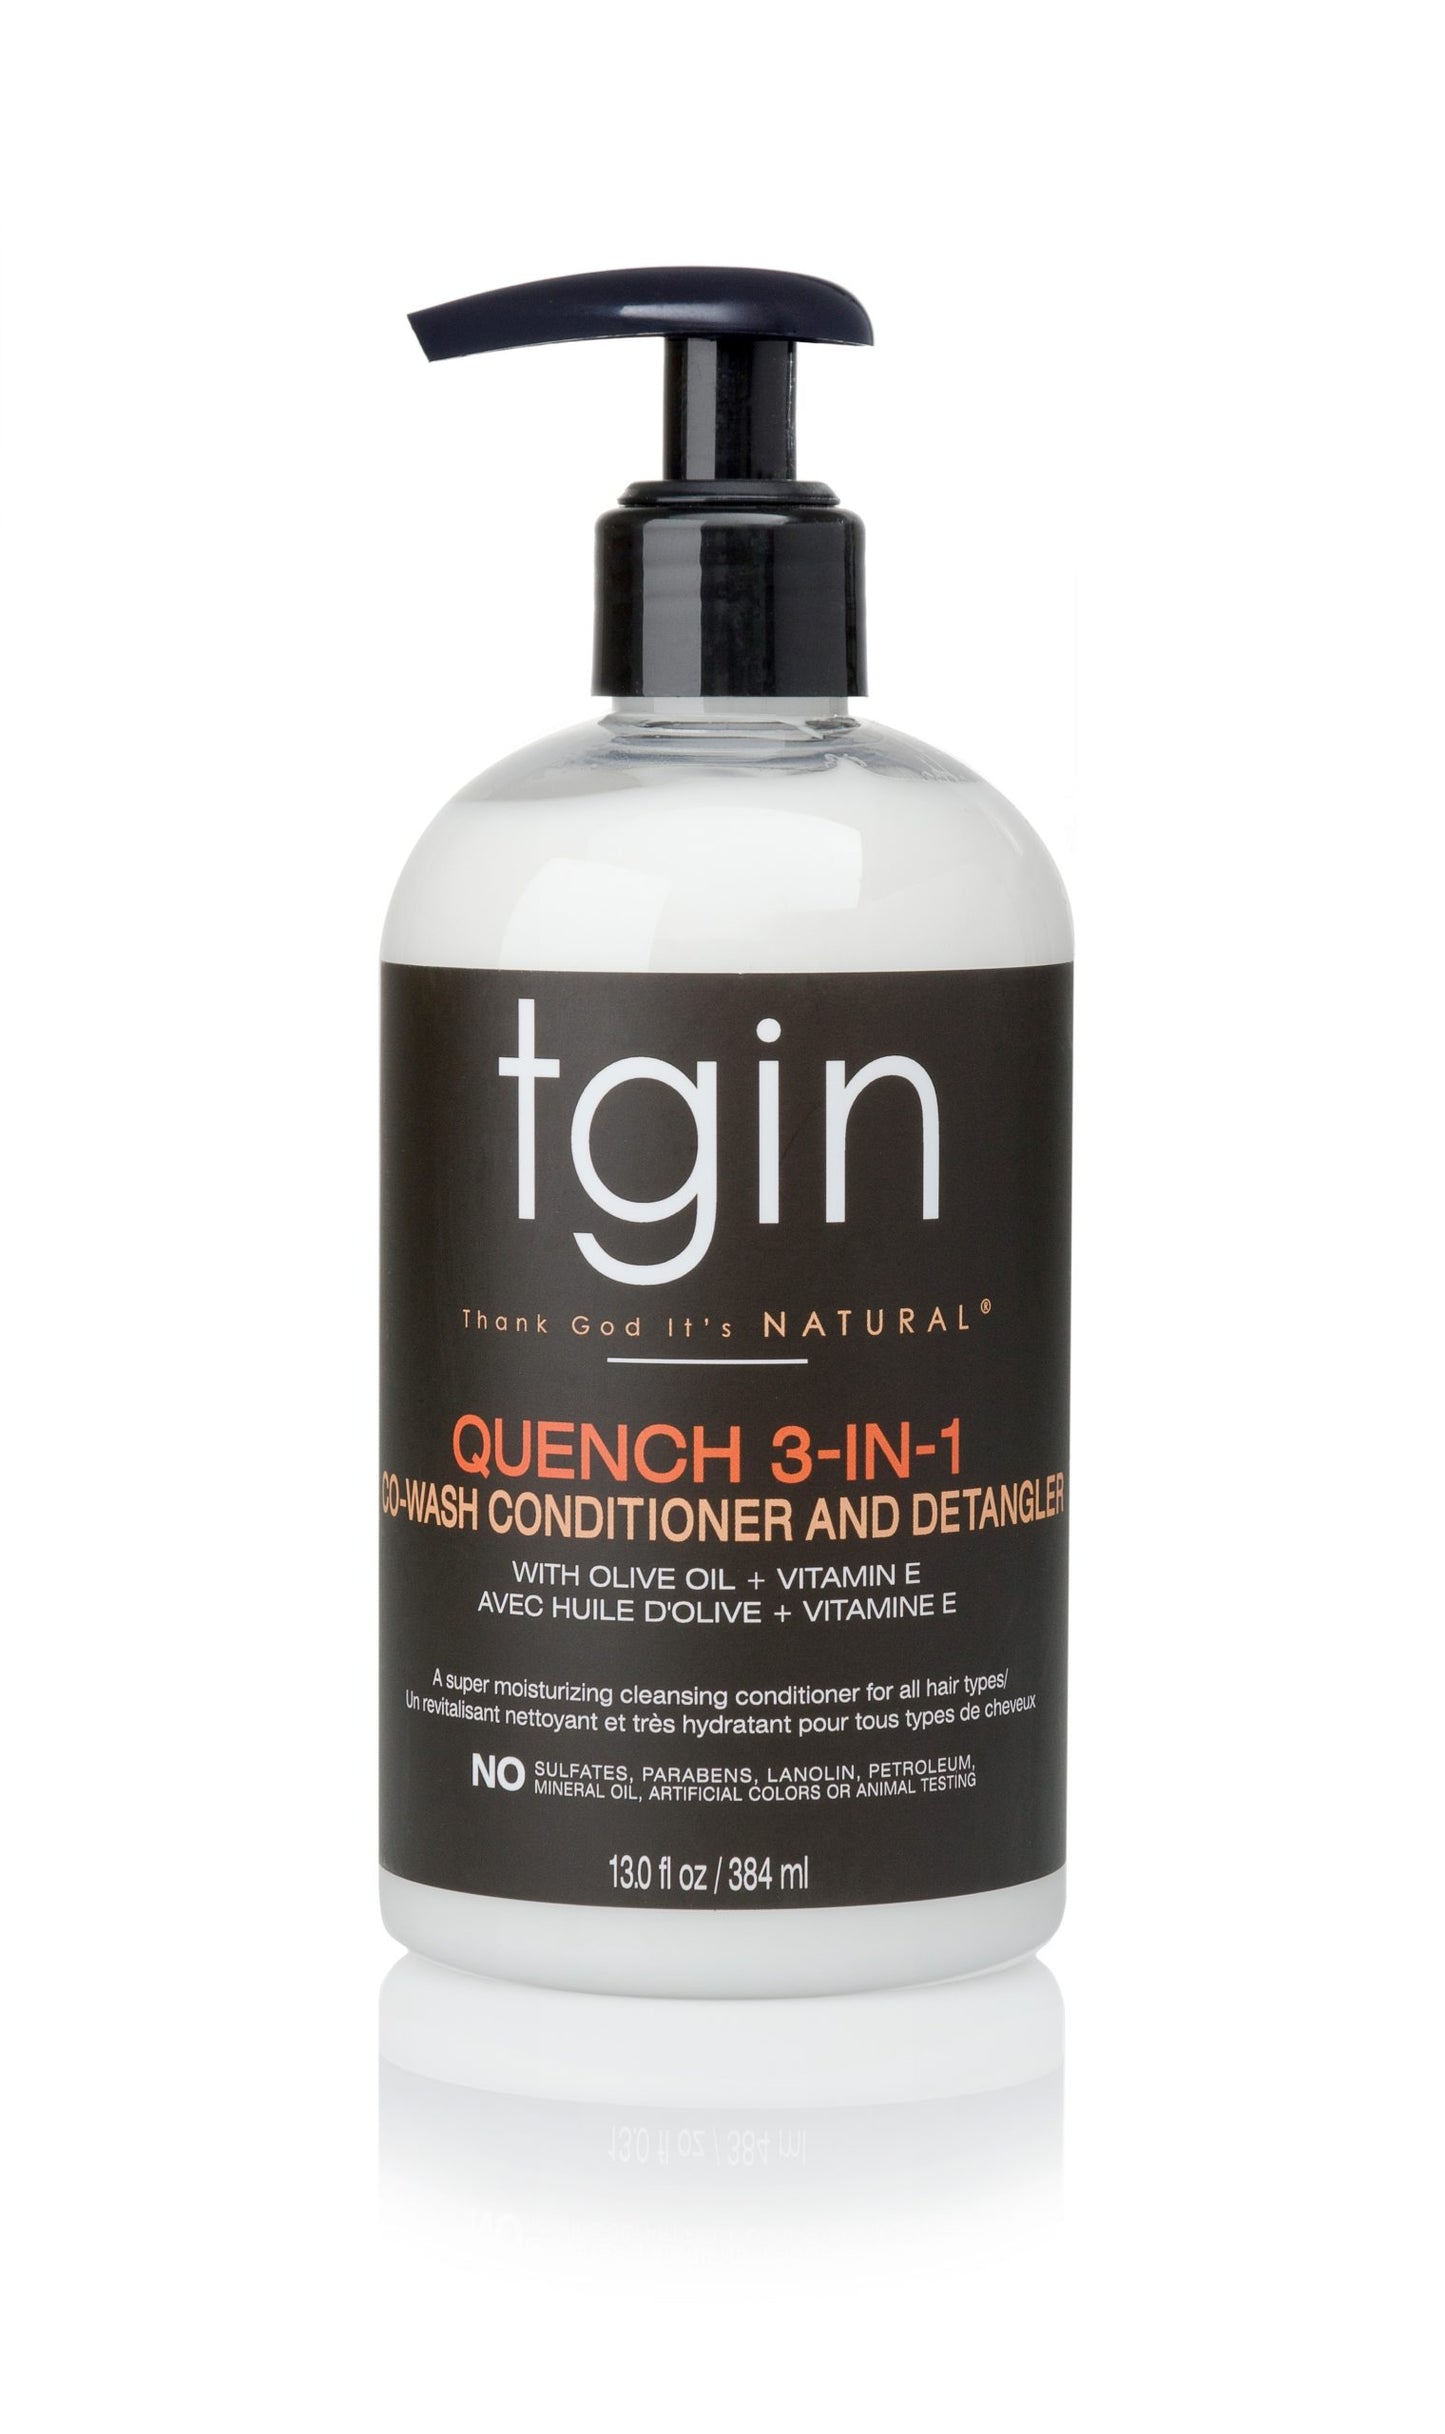 tgin Quench 3-in-1 Co-Wash Conditioner and Detangler - 13oz